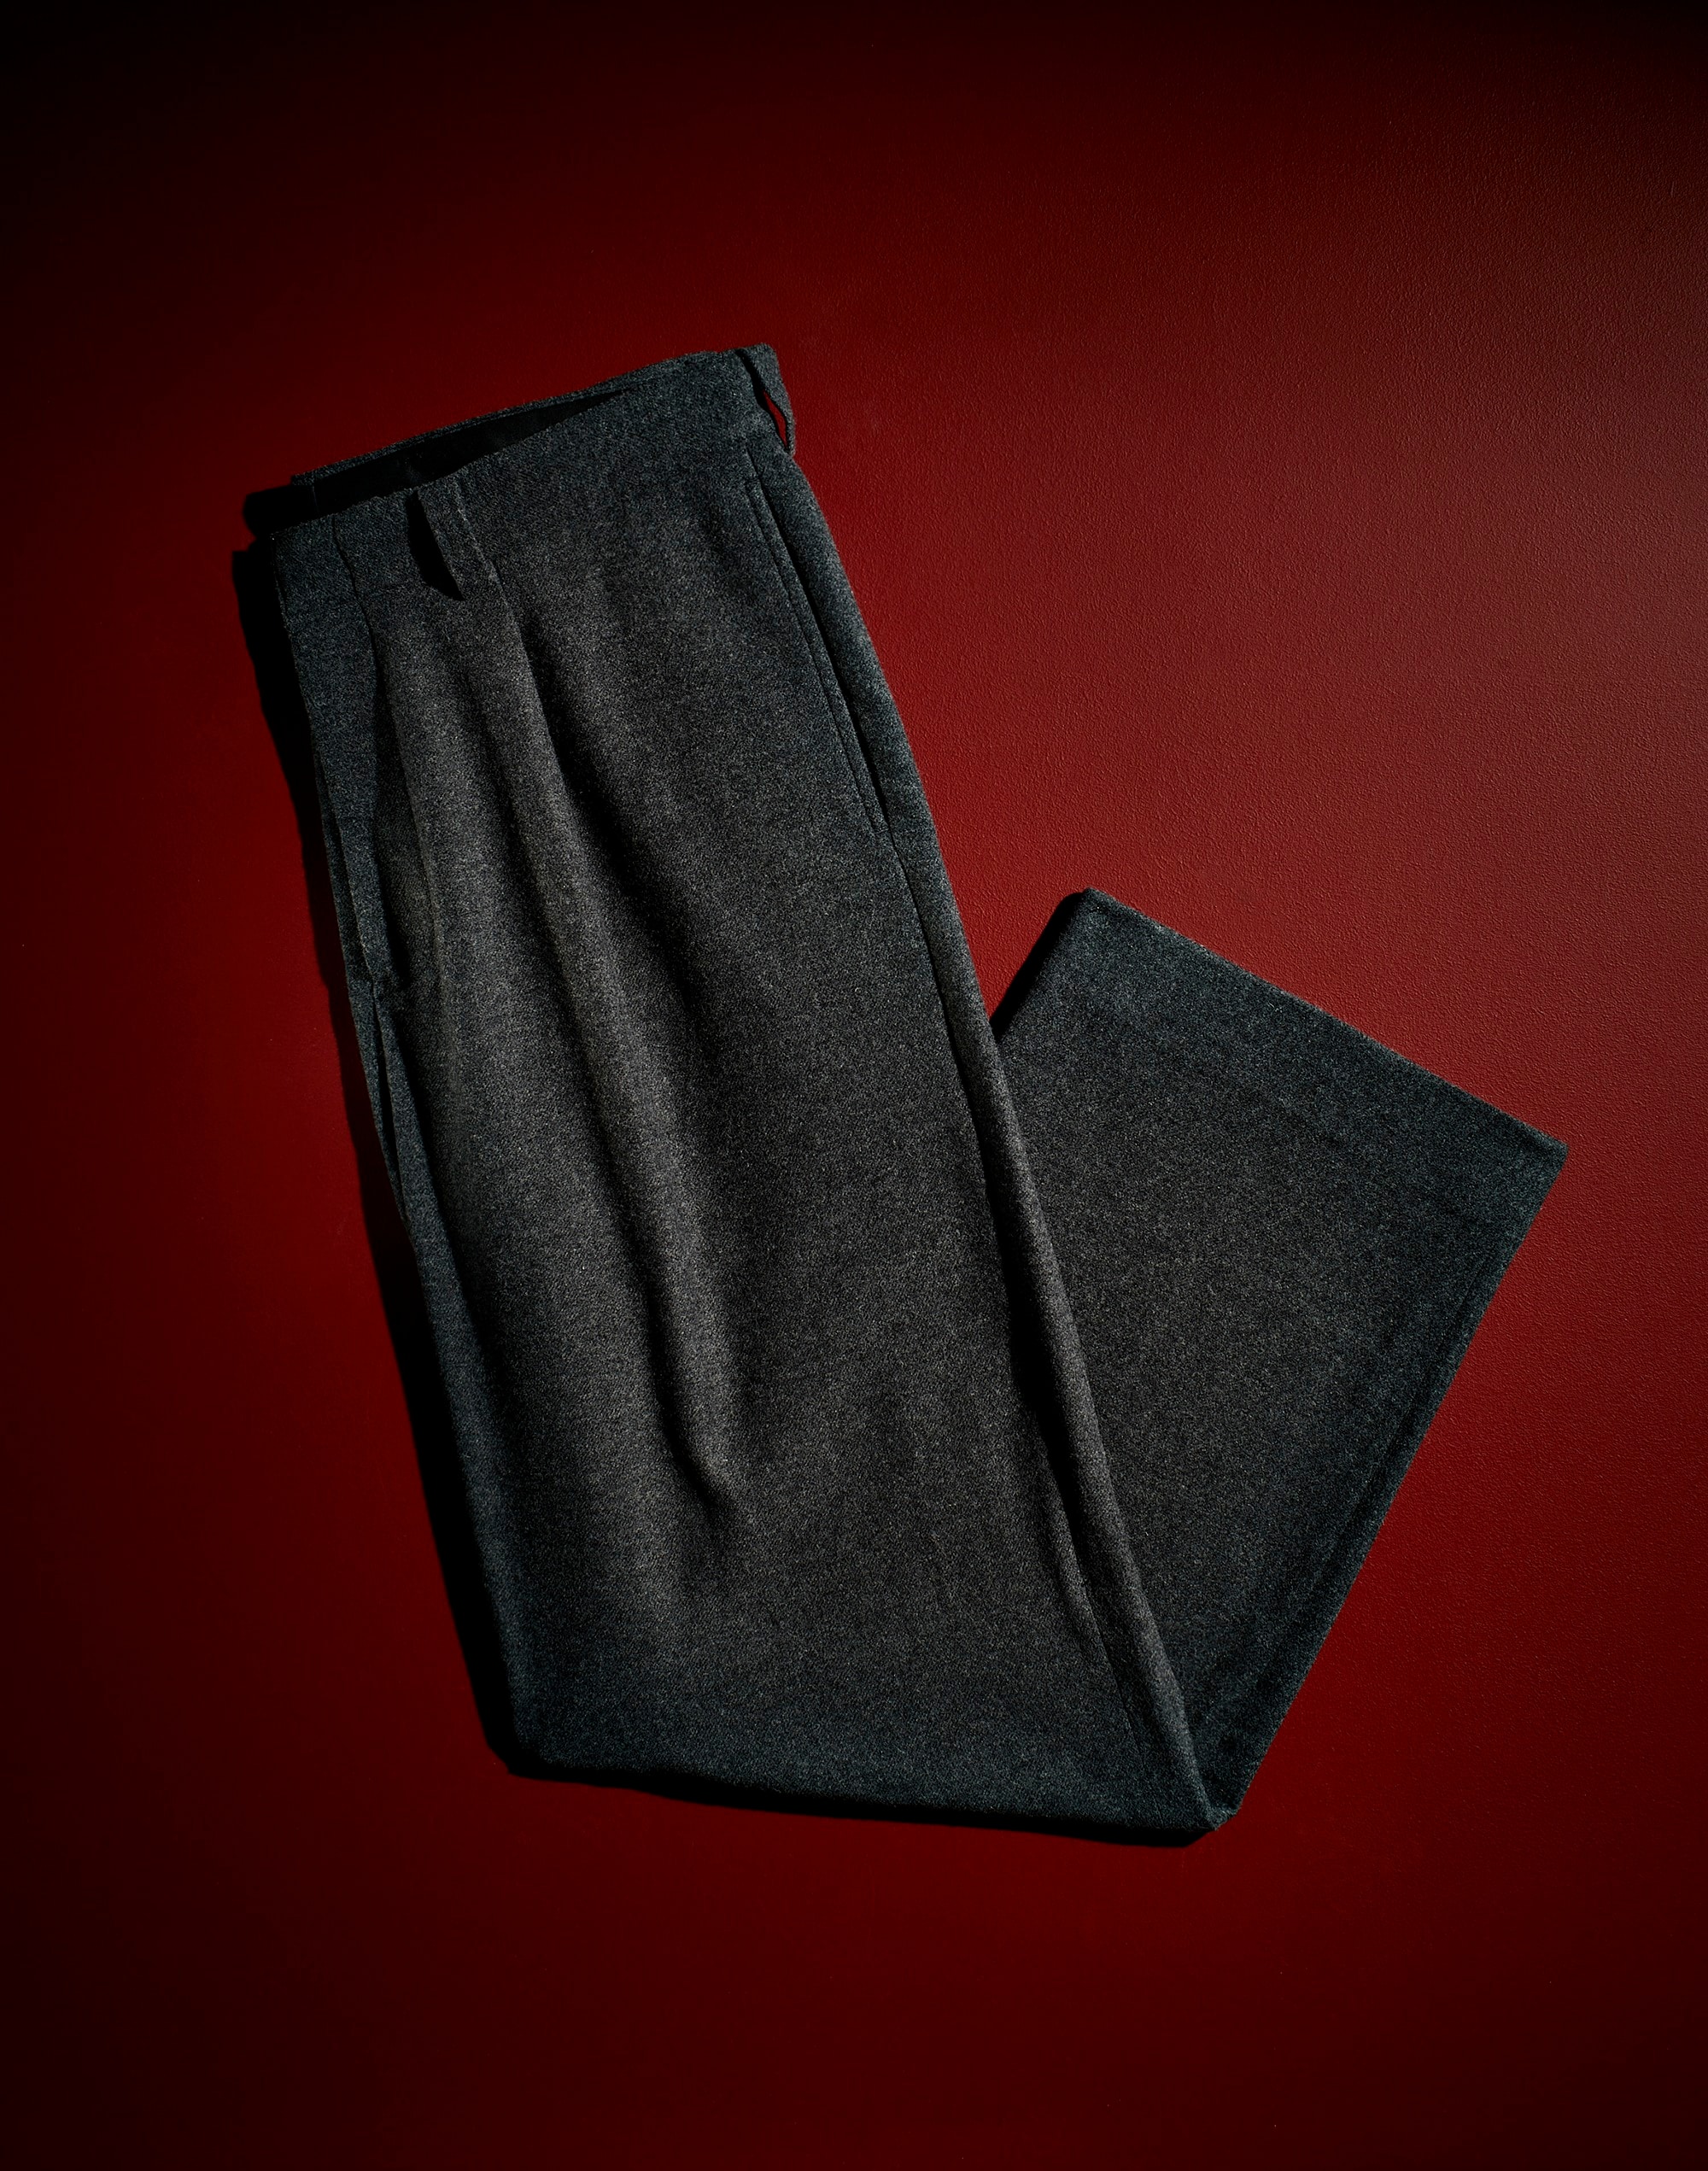 The Roebling Pleated Trousers Italian Fabric